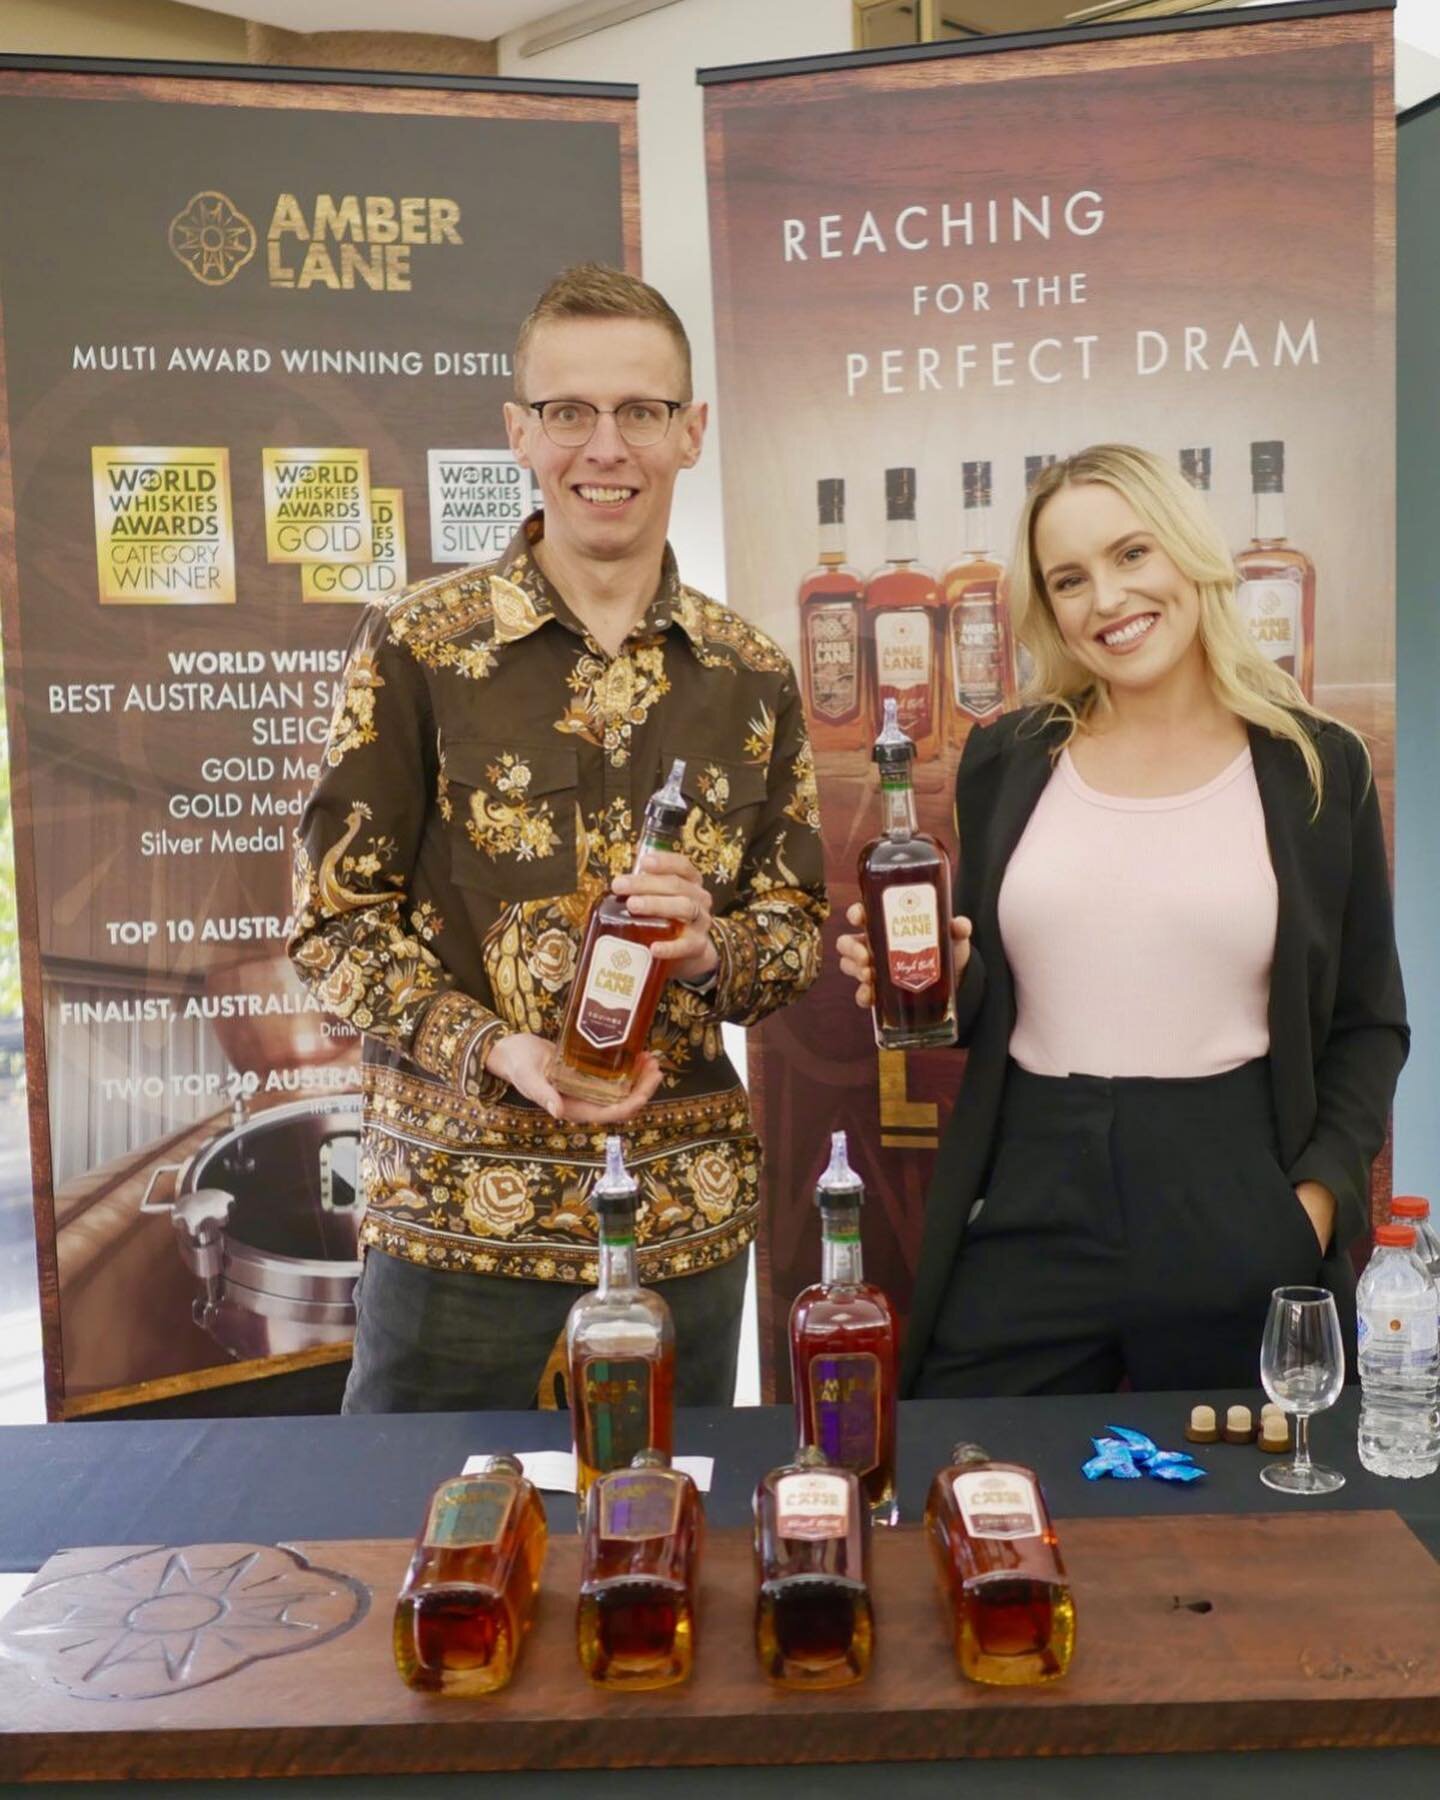 Whisky fans of Adelaide&hellip; Amber Lane has arrived on your doorstep. Come along to The Whisky Show today to taste our gold medal-winning whisky! Say hello to Justin, seen here with @agirltastingwhiskey at our stand!
#amberlanewhisky #australianwh